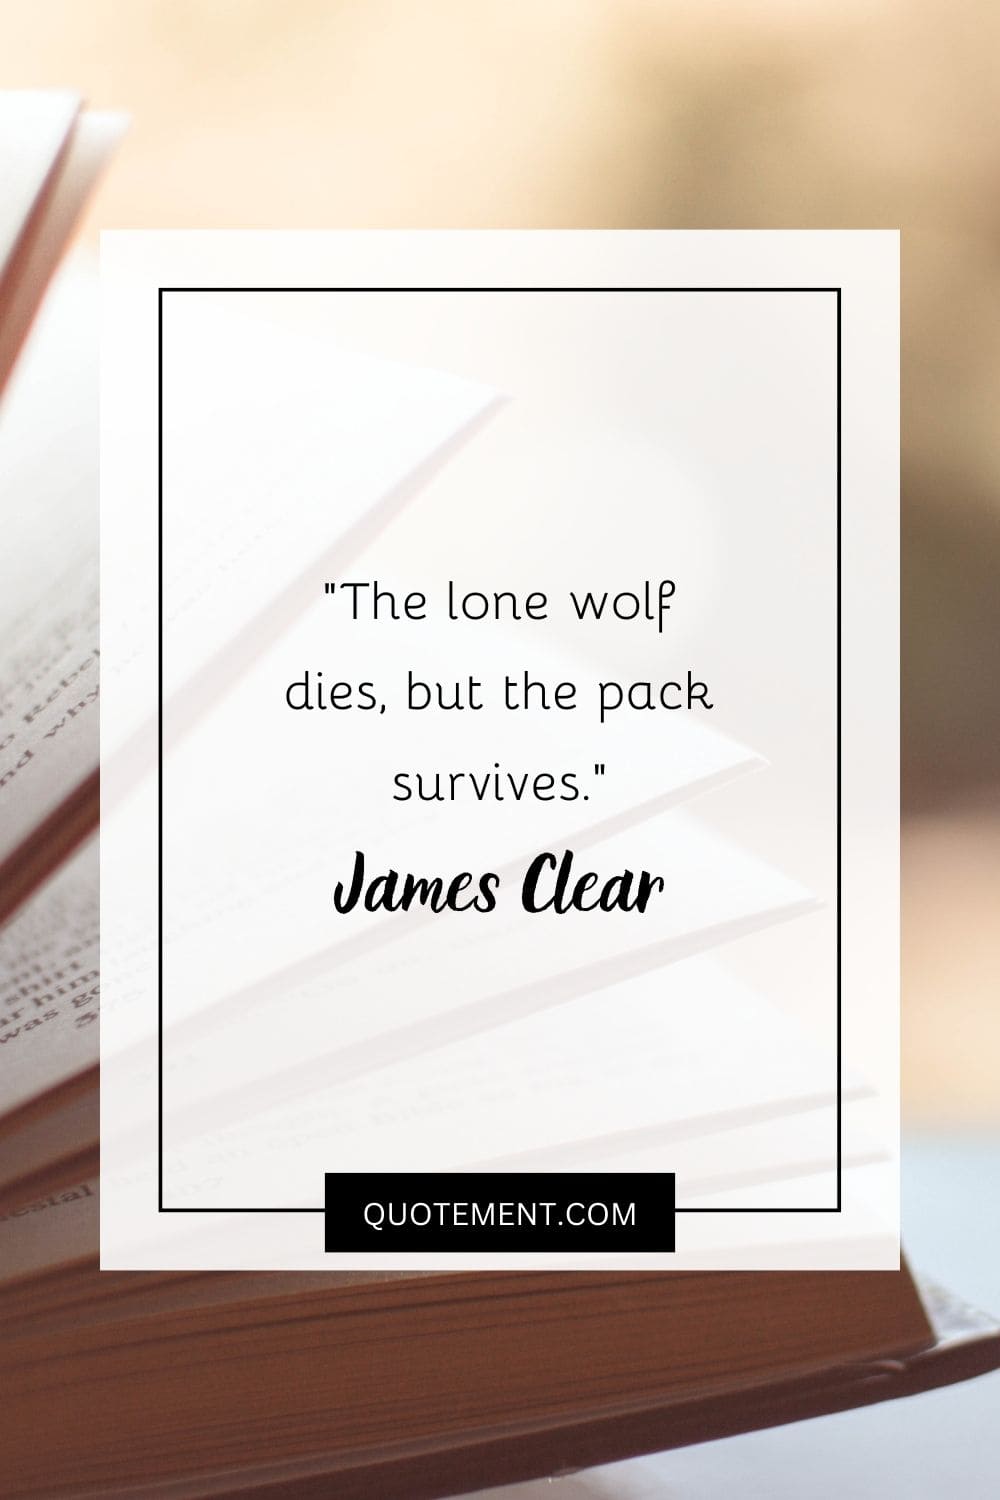 The lone wolf dies, but the pack survives